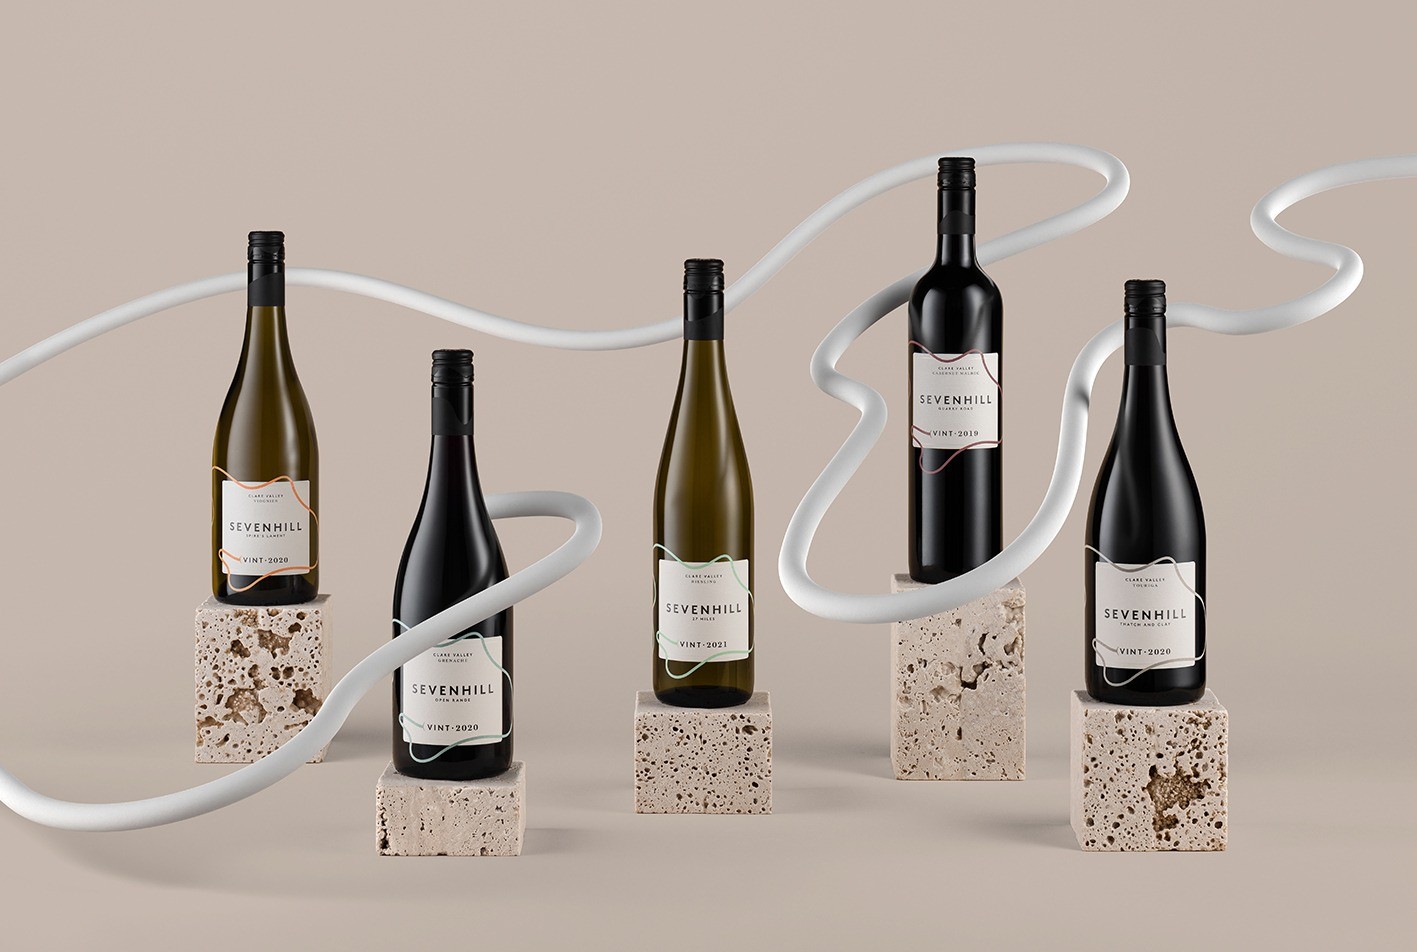 Voice Creates Wine Range Packaging for One of Australia’s Most Extraordinary Vineyards